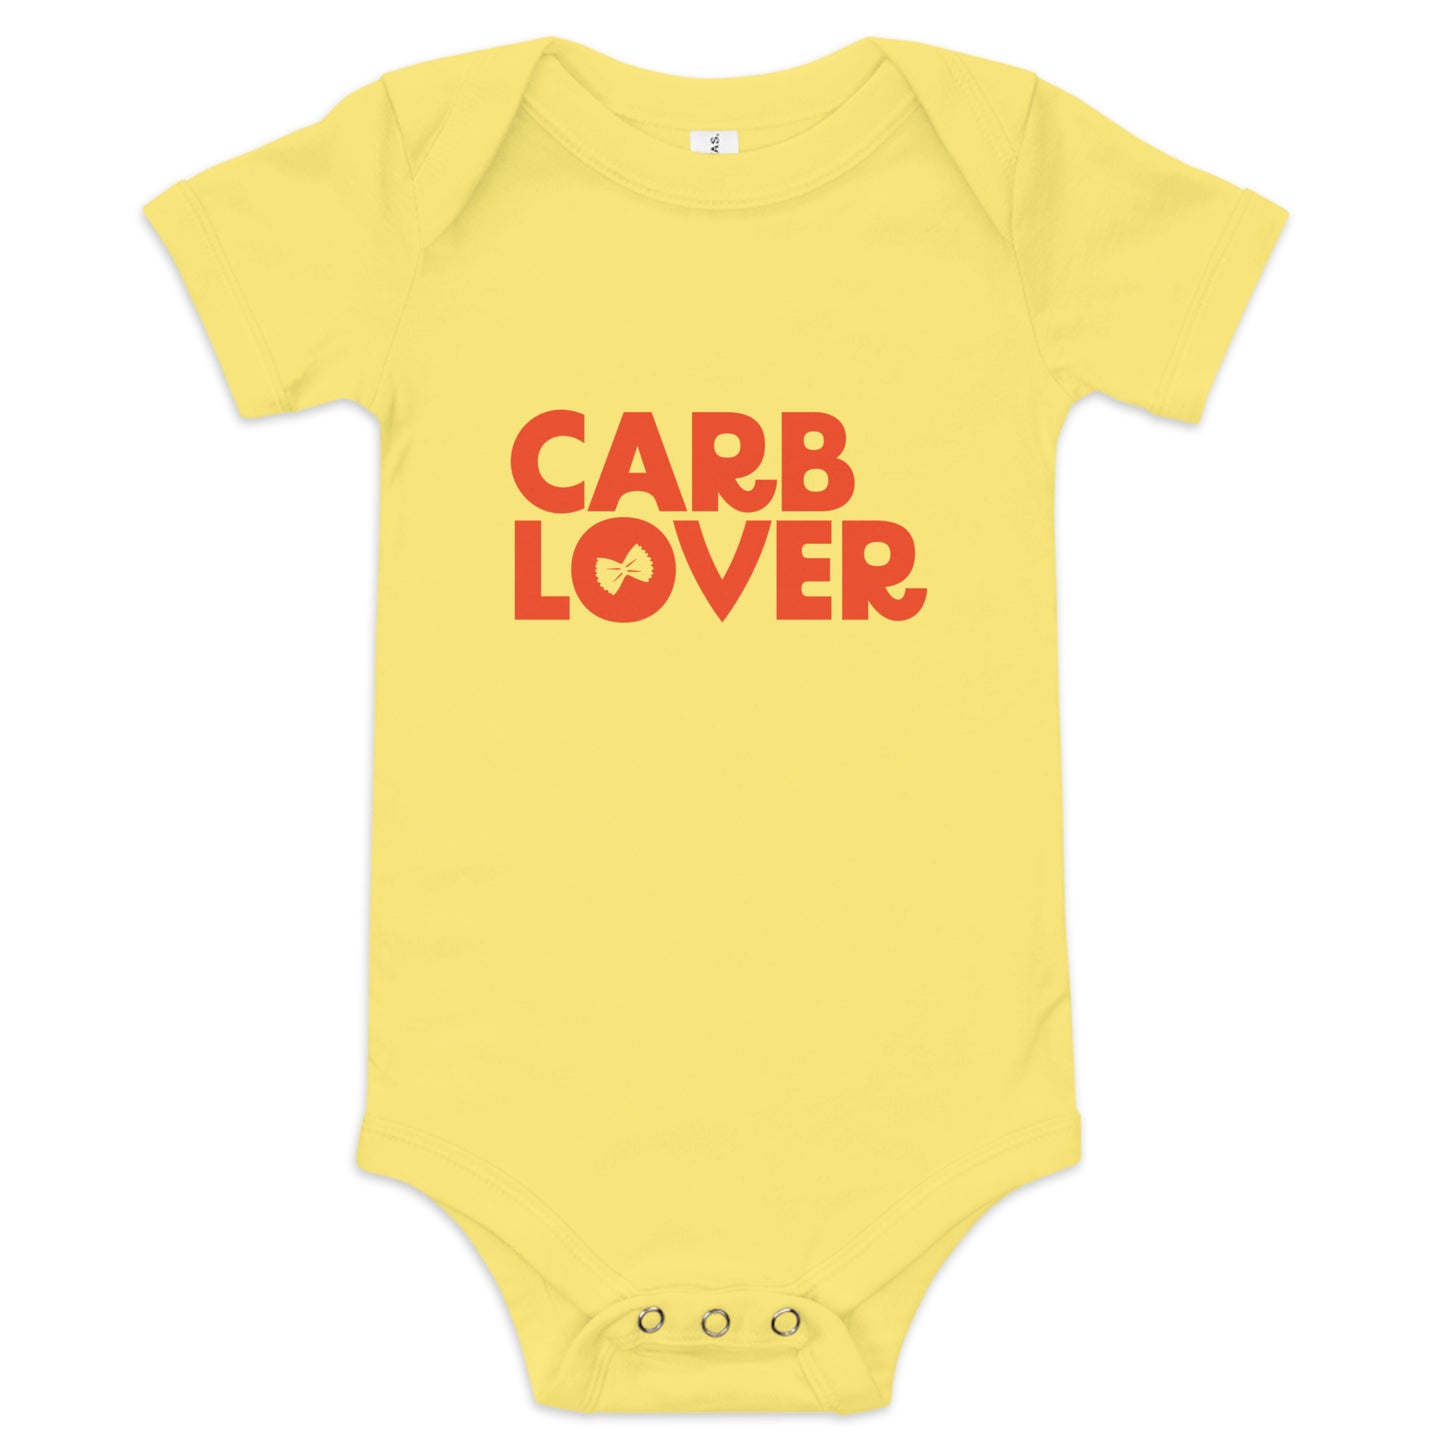 Carb Lover - Baby Bodysuit